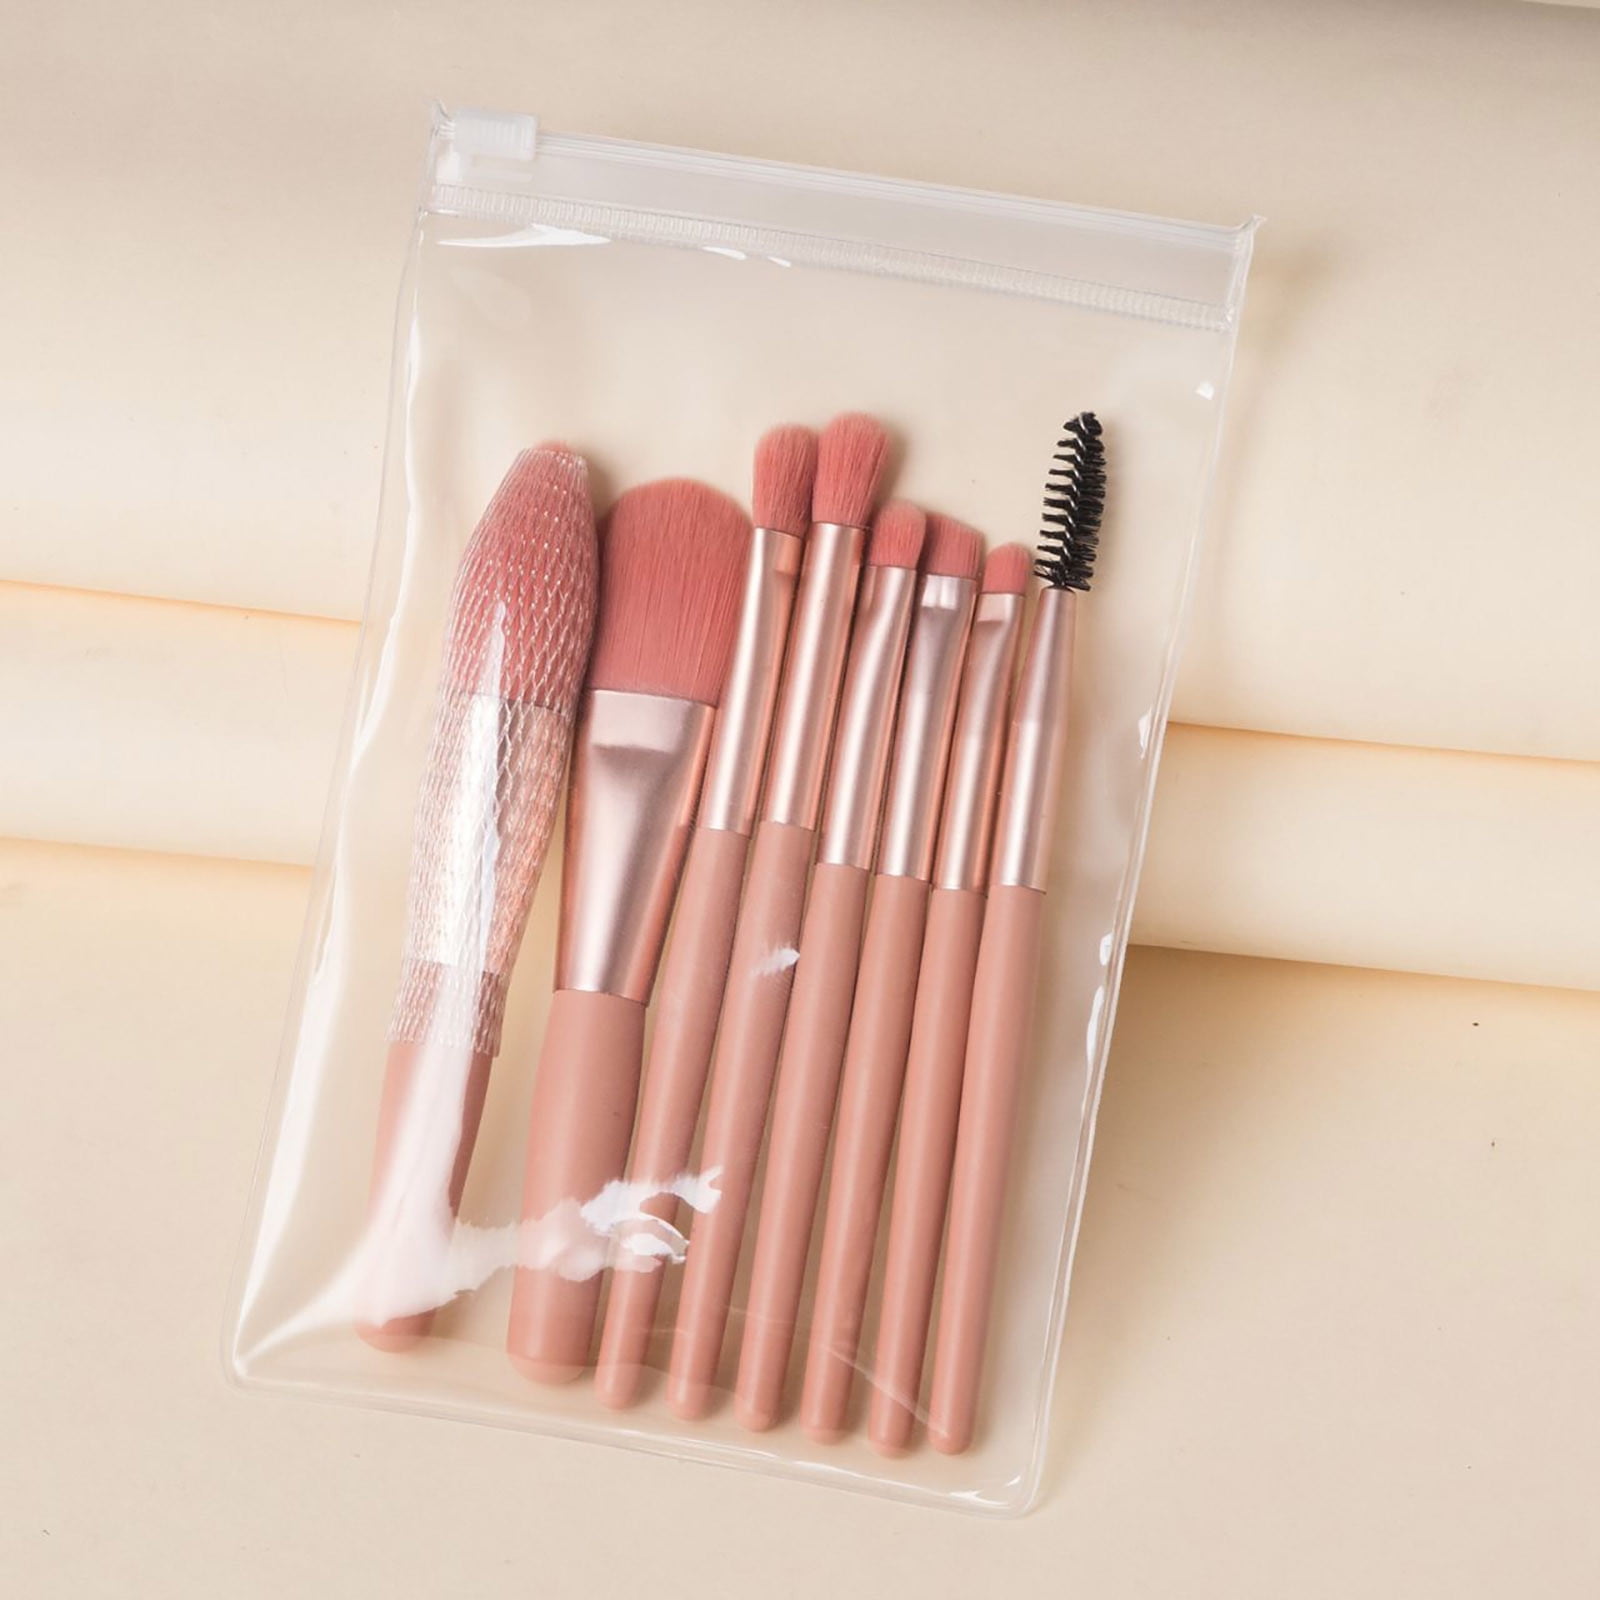 8PCS/Set Mini Face Makeup Brushes With Bag Eyeshadow Foundation Blending  Soft Brush For Party Gift Traveling Cosmetics Tools - AliExpress